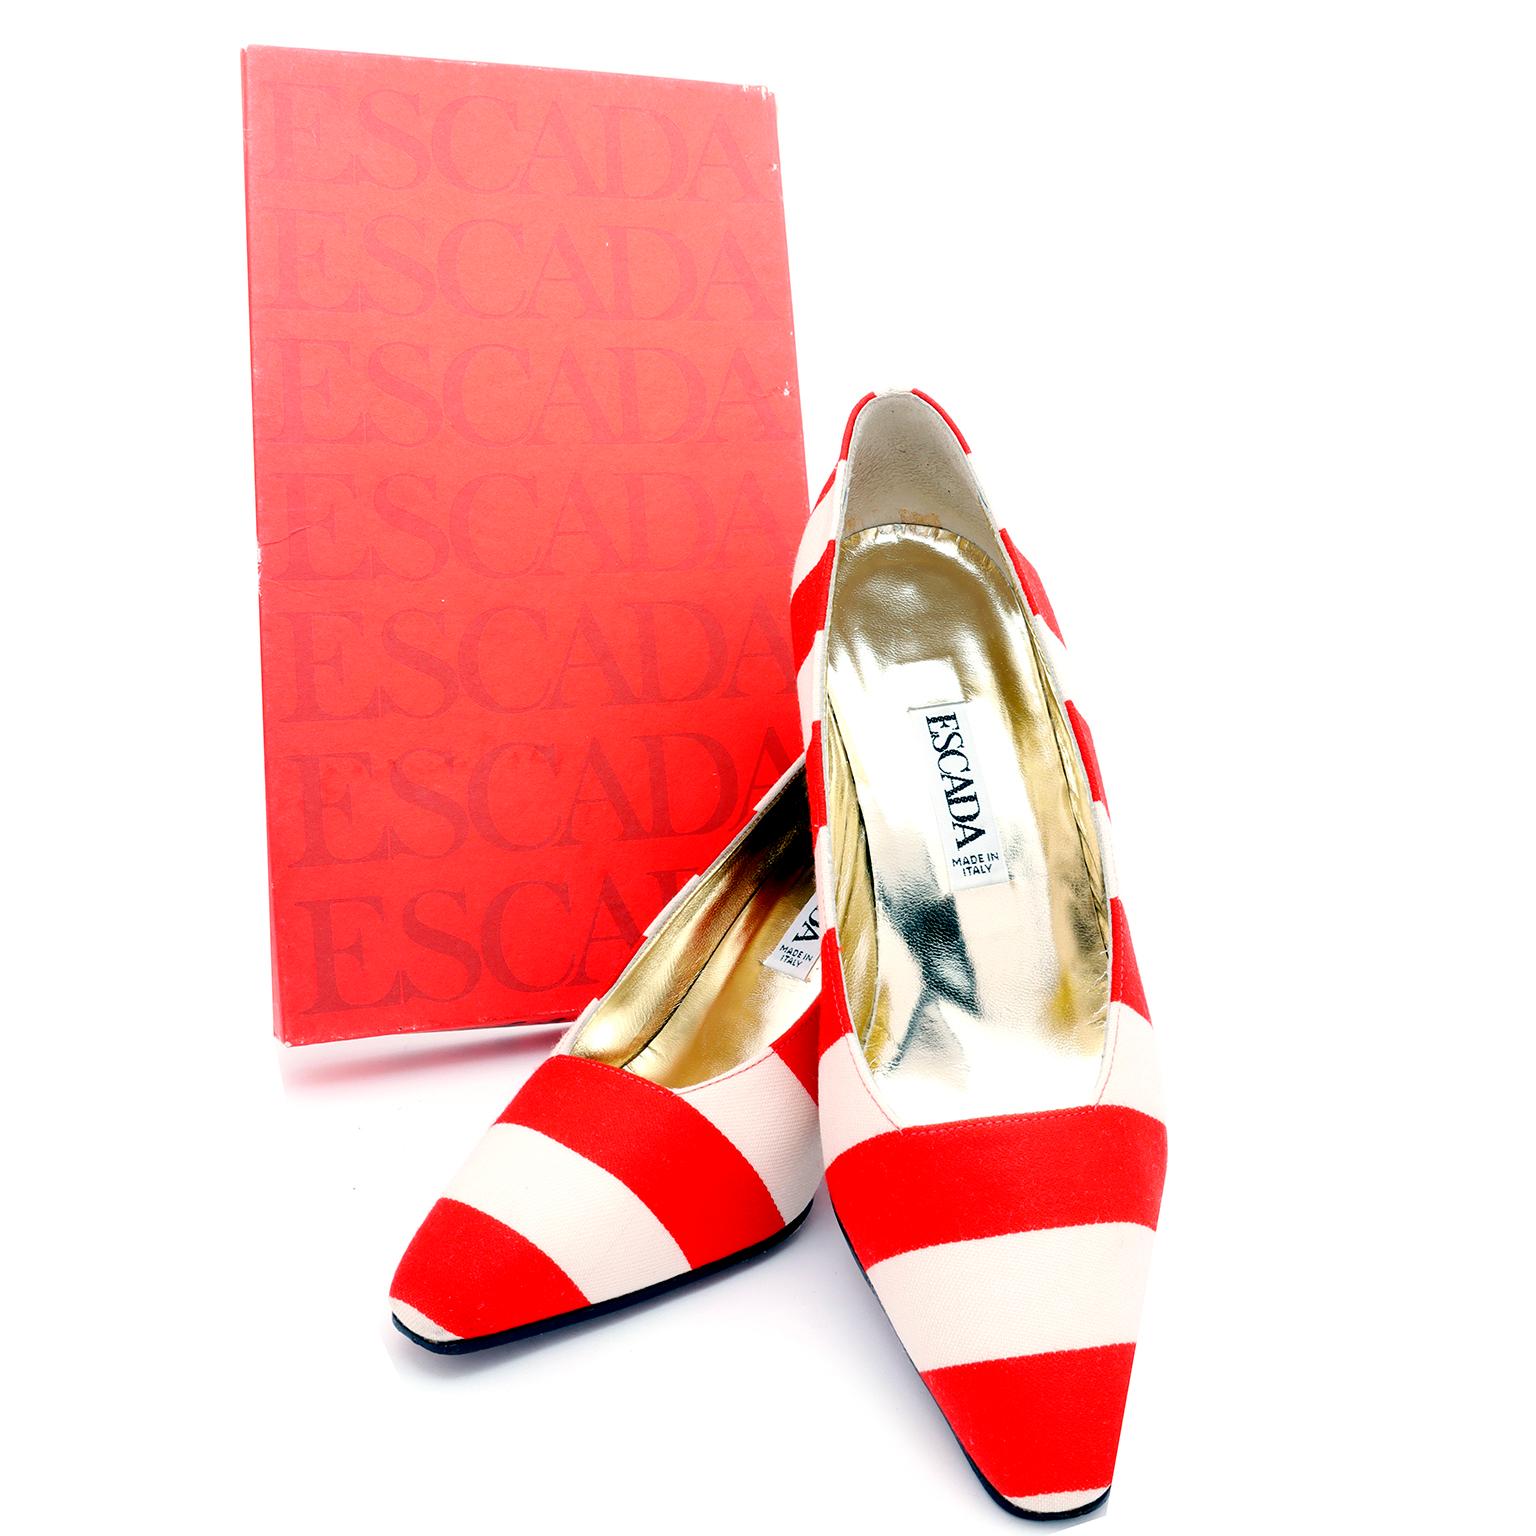 These are really fun vintage Escada Red and White striped pumps with black patent leather heels! The insoles are gold and the shoes are marked a size  7B. These come with their original box and were made in Italy in the late 1980's or early